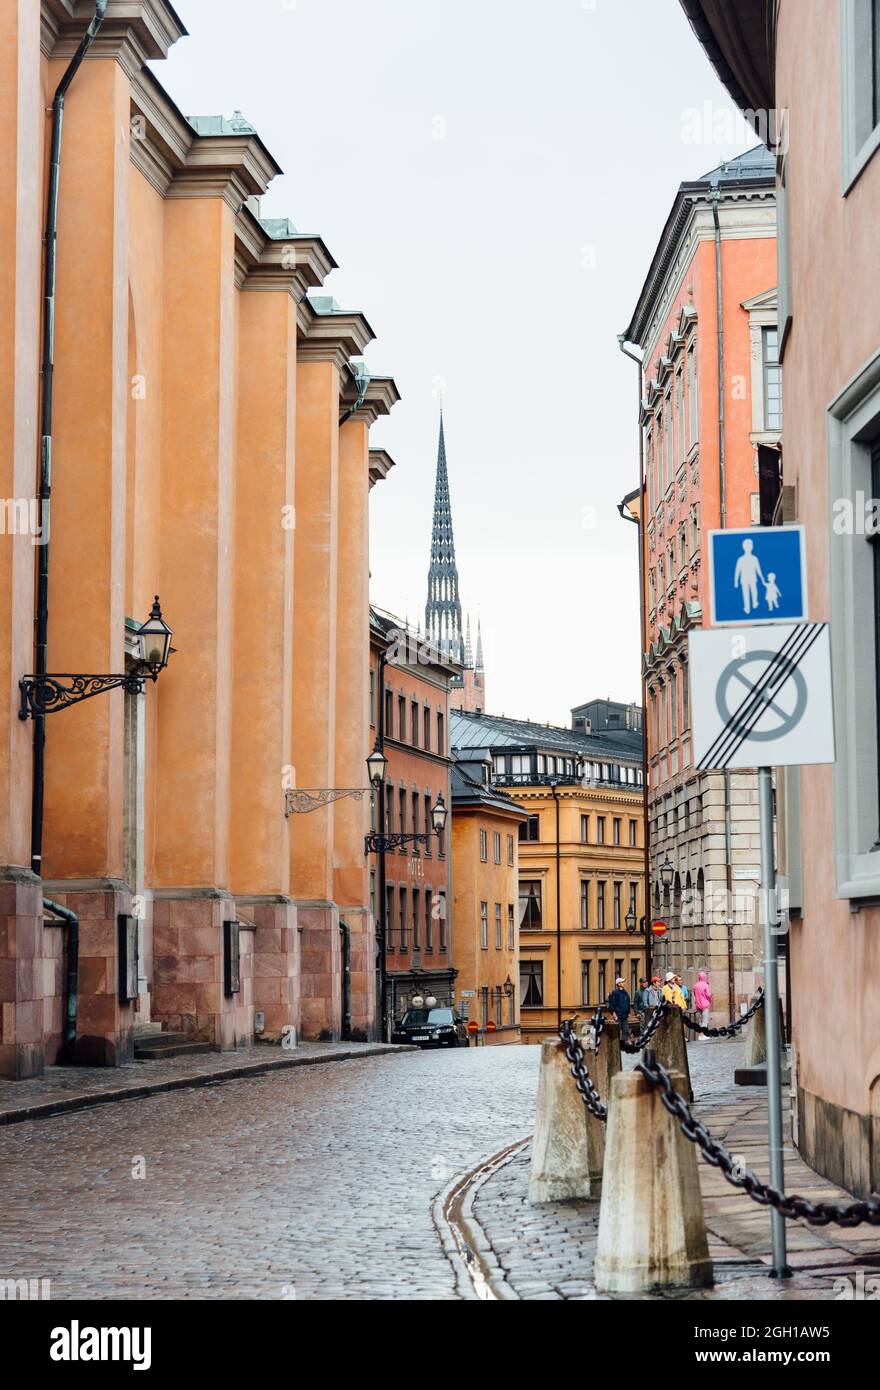 Cityscape of Gamla Stan. The Old Town is one of the largest and best preserved medieval city centers in Europe. Stock Photo